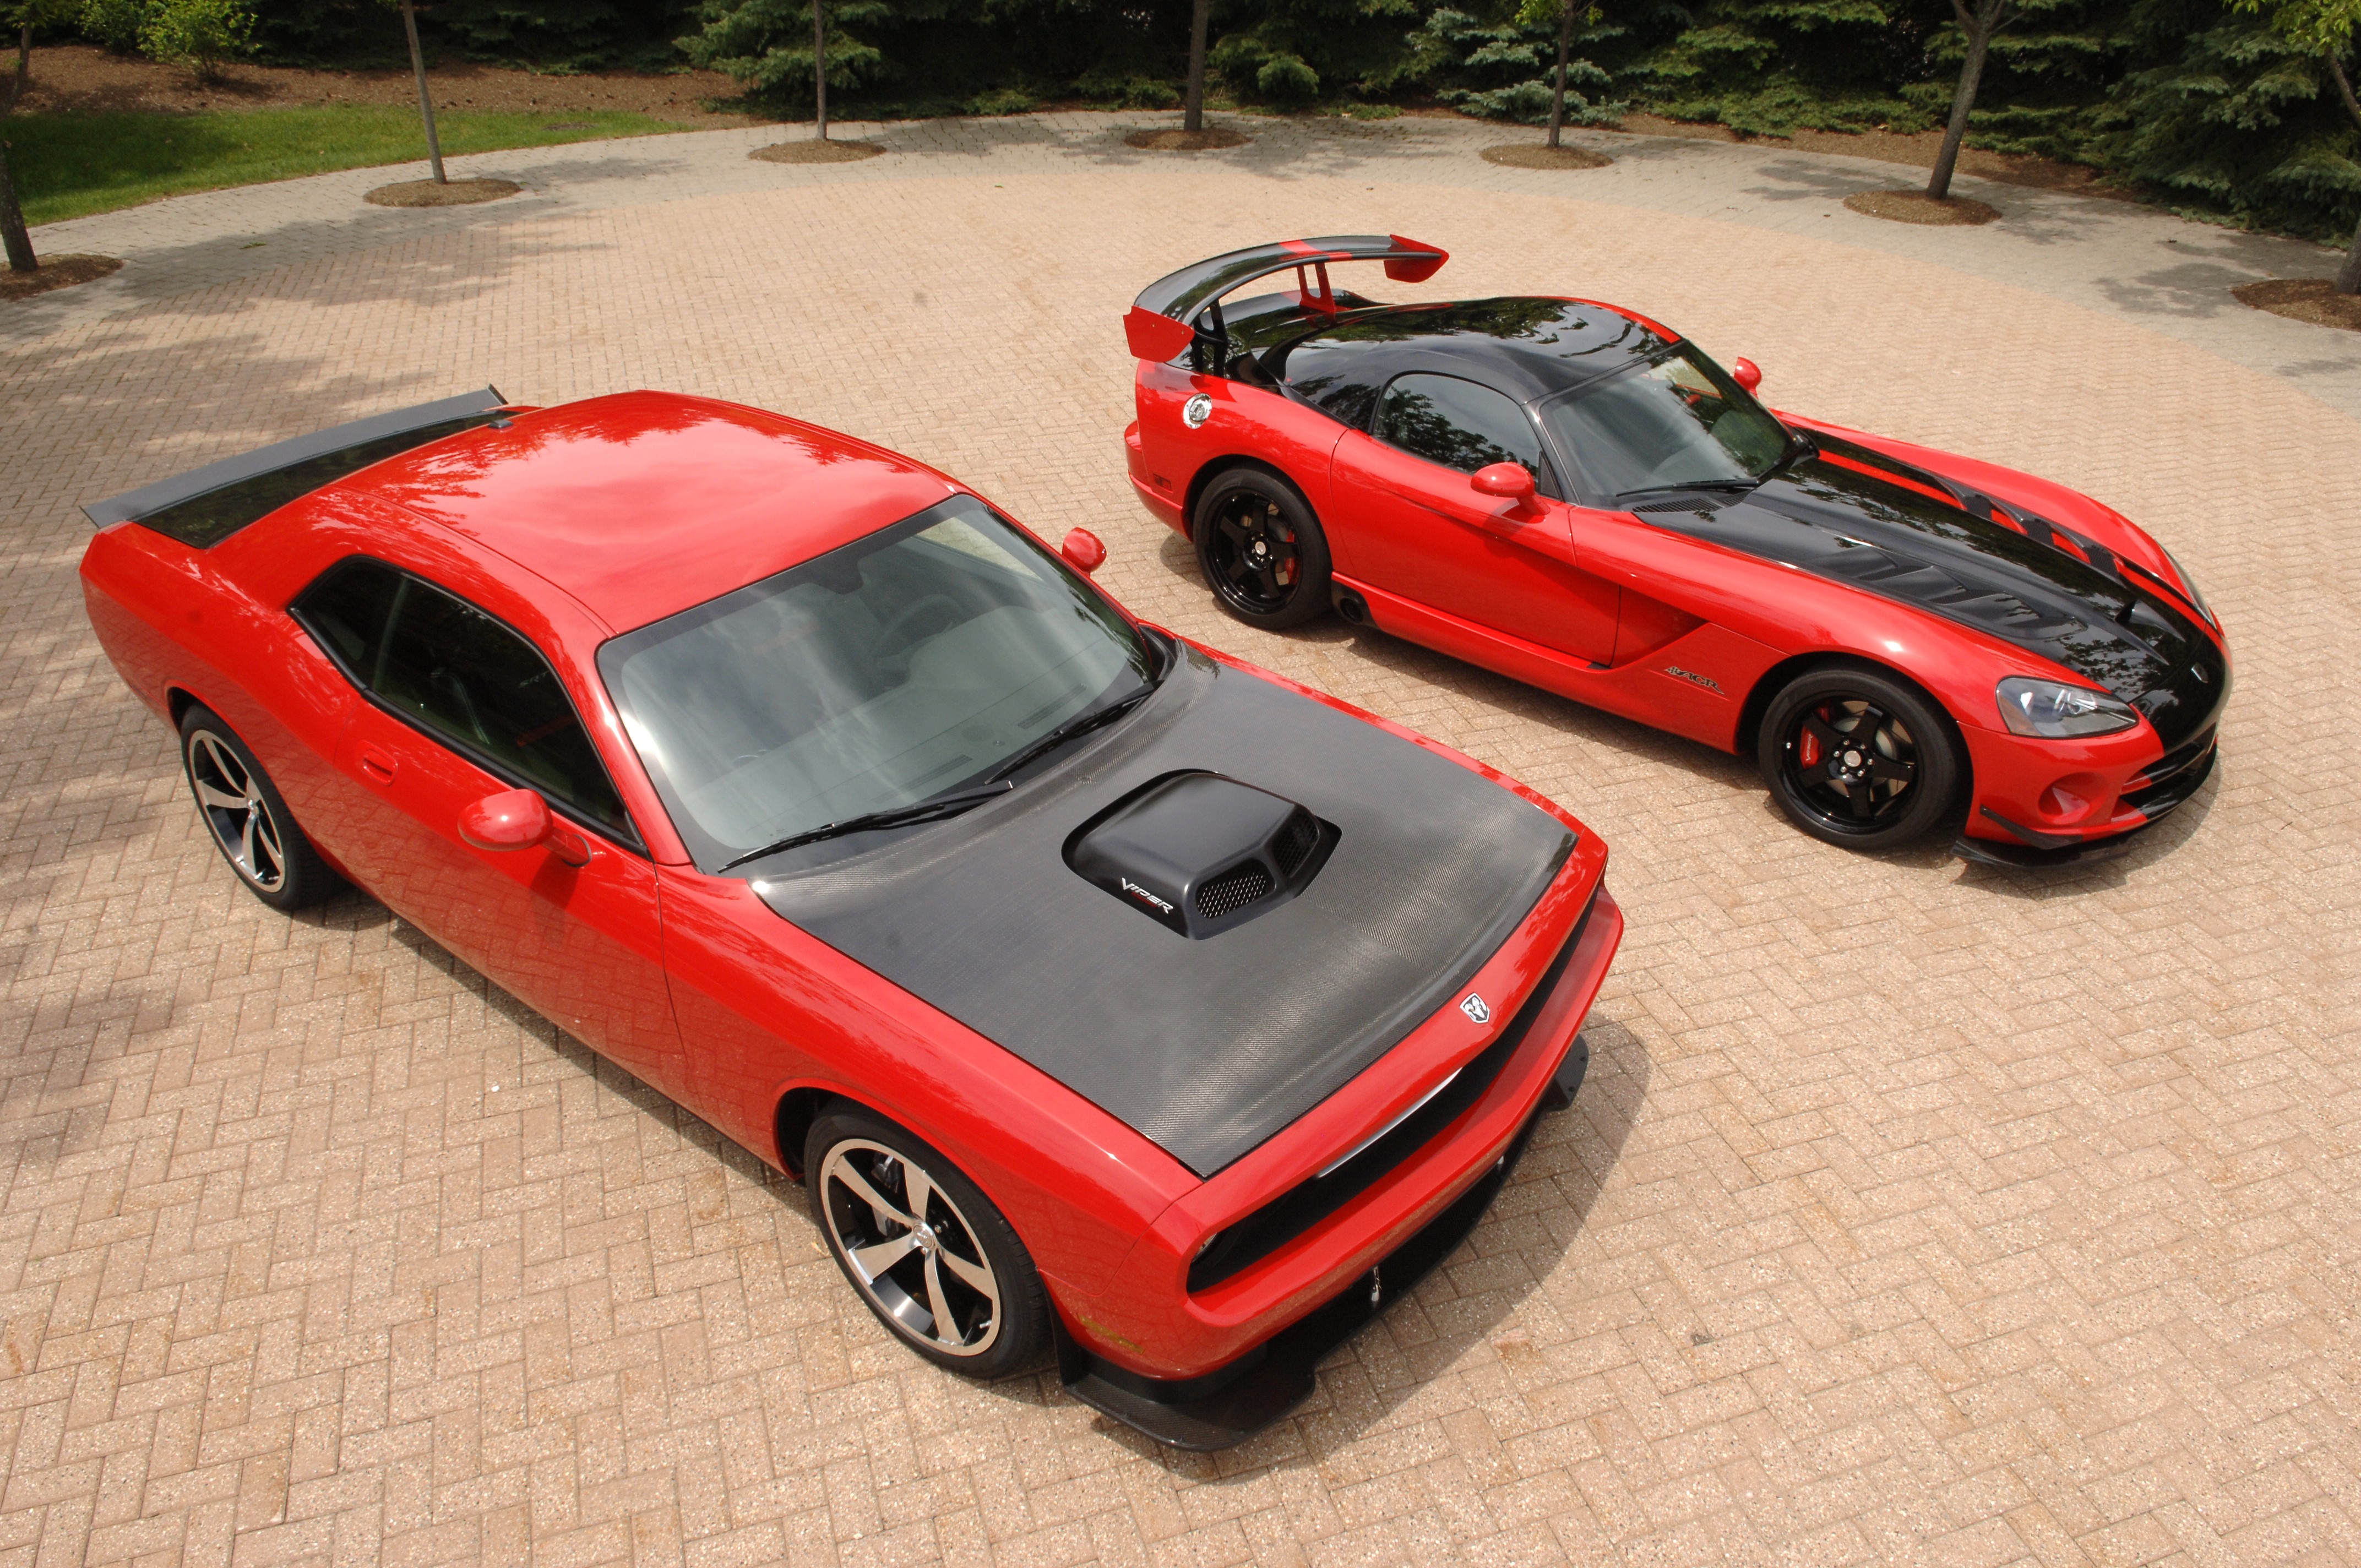 General 4288x2848 car red cars Dodge Dodge Viper Dodge Challenger vehicle muscle cars American cars Stellantis